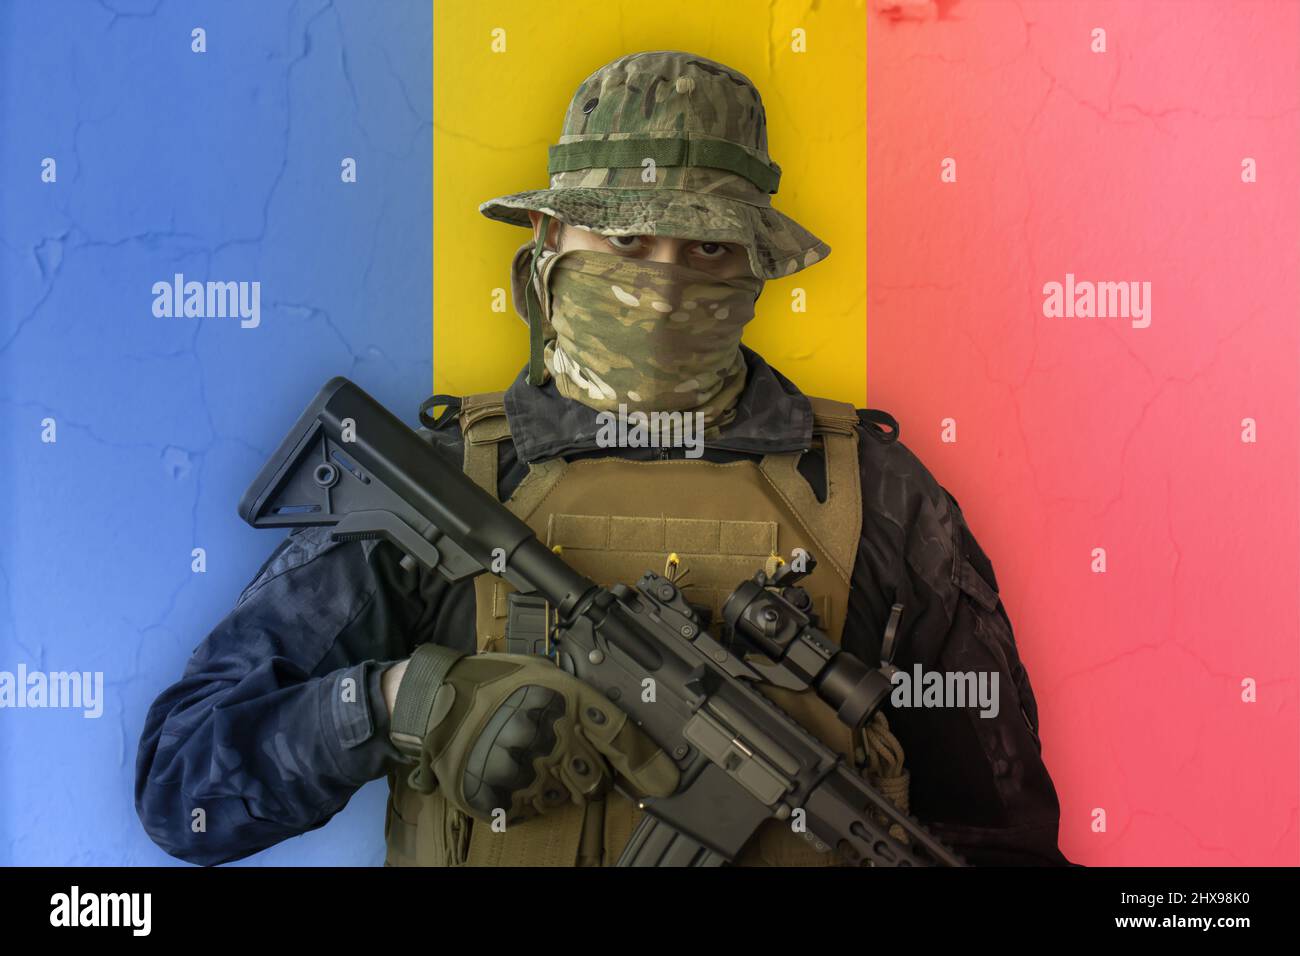 Angry romanian soldier armed with rifle with romania flag as background behind Stock Photo